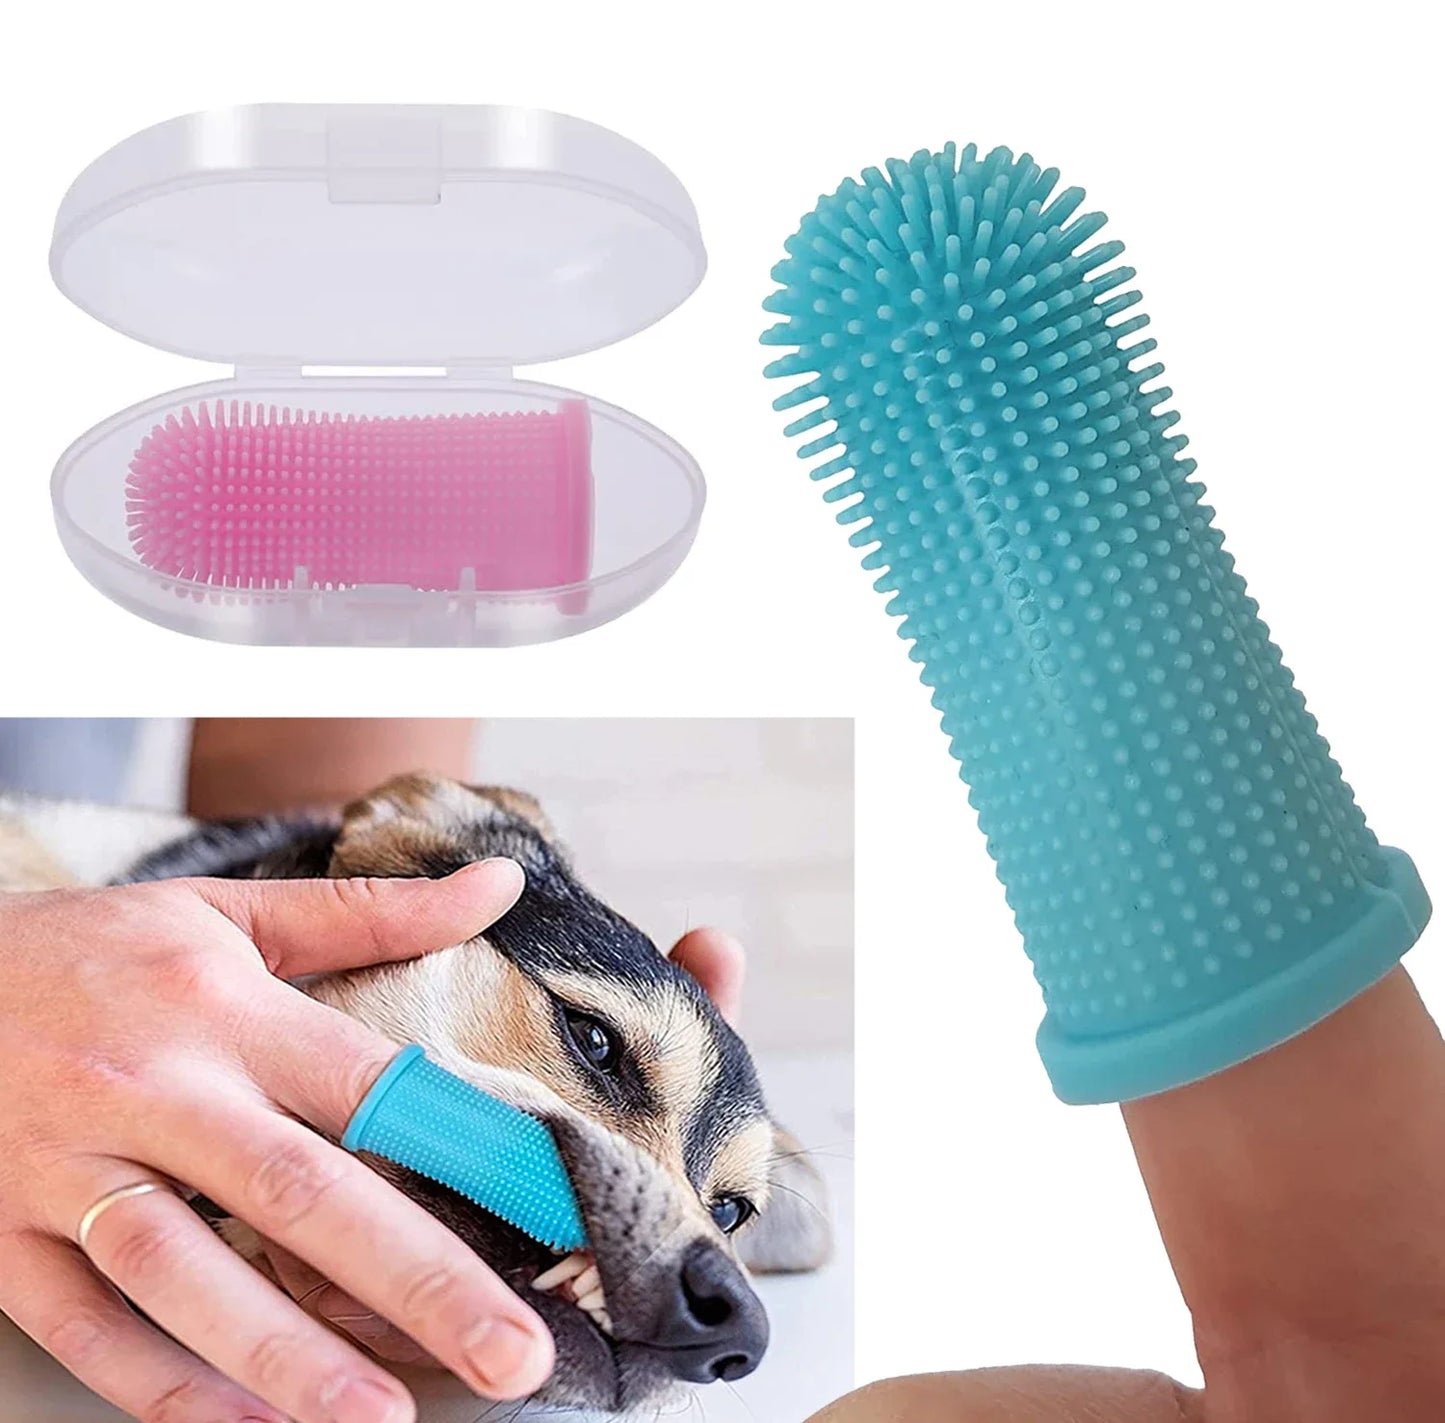 Super Soft Pet Finger Toothbrush - Dog Teeth Cleaning Tool for Bad Breath Care, Nontoxic Silicone Tooth Brush for Dogs and Cats